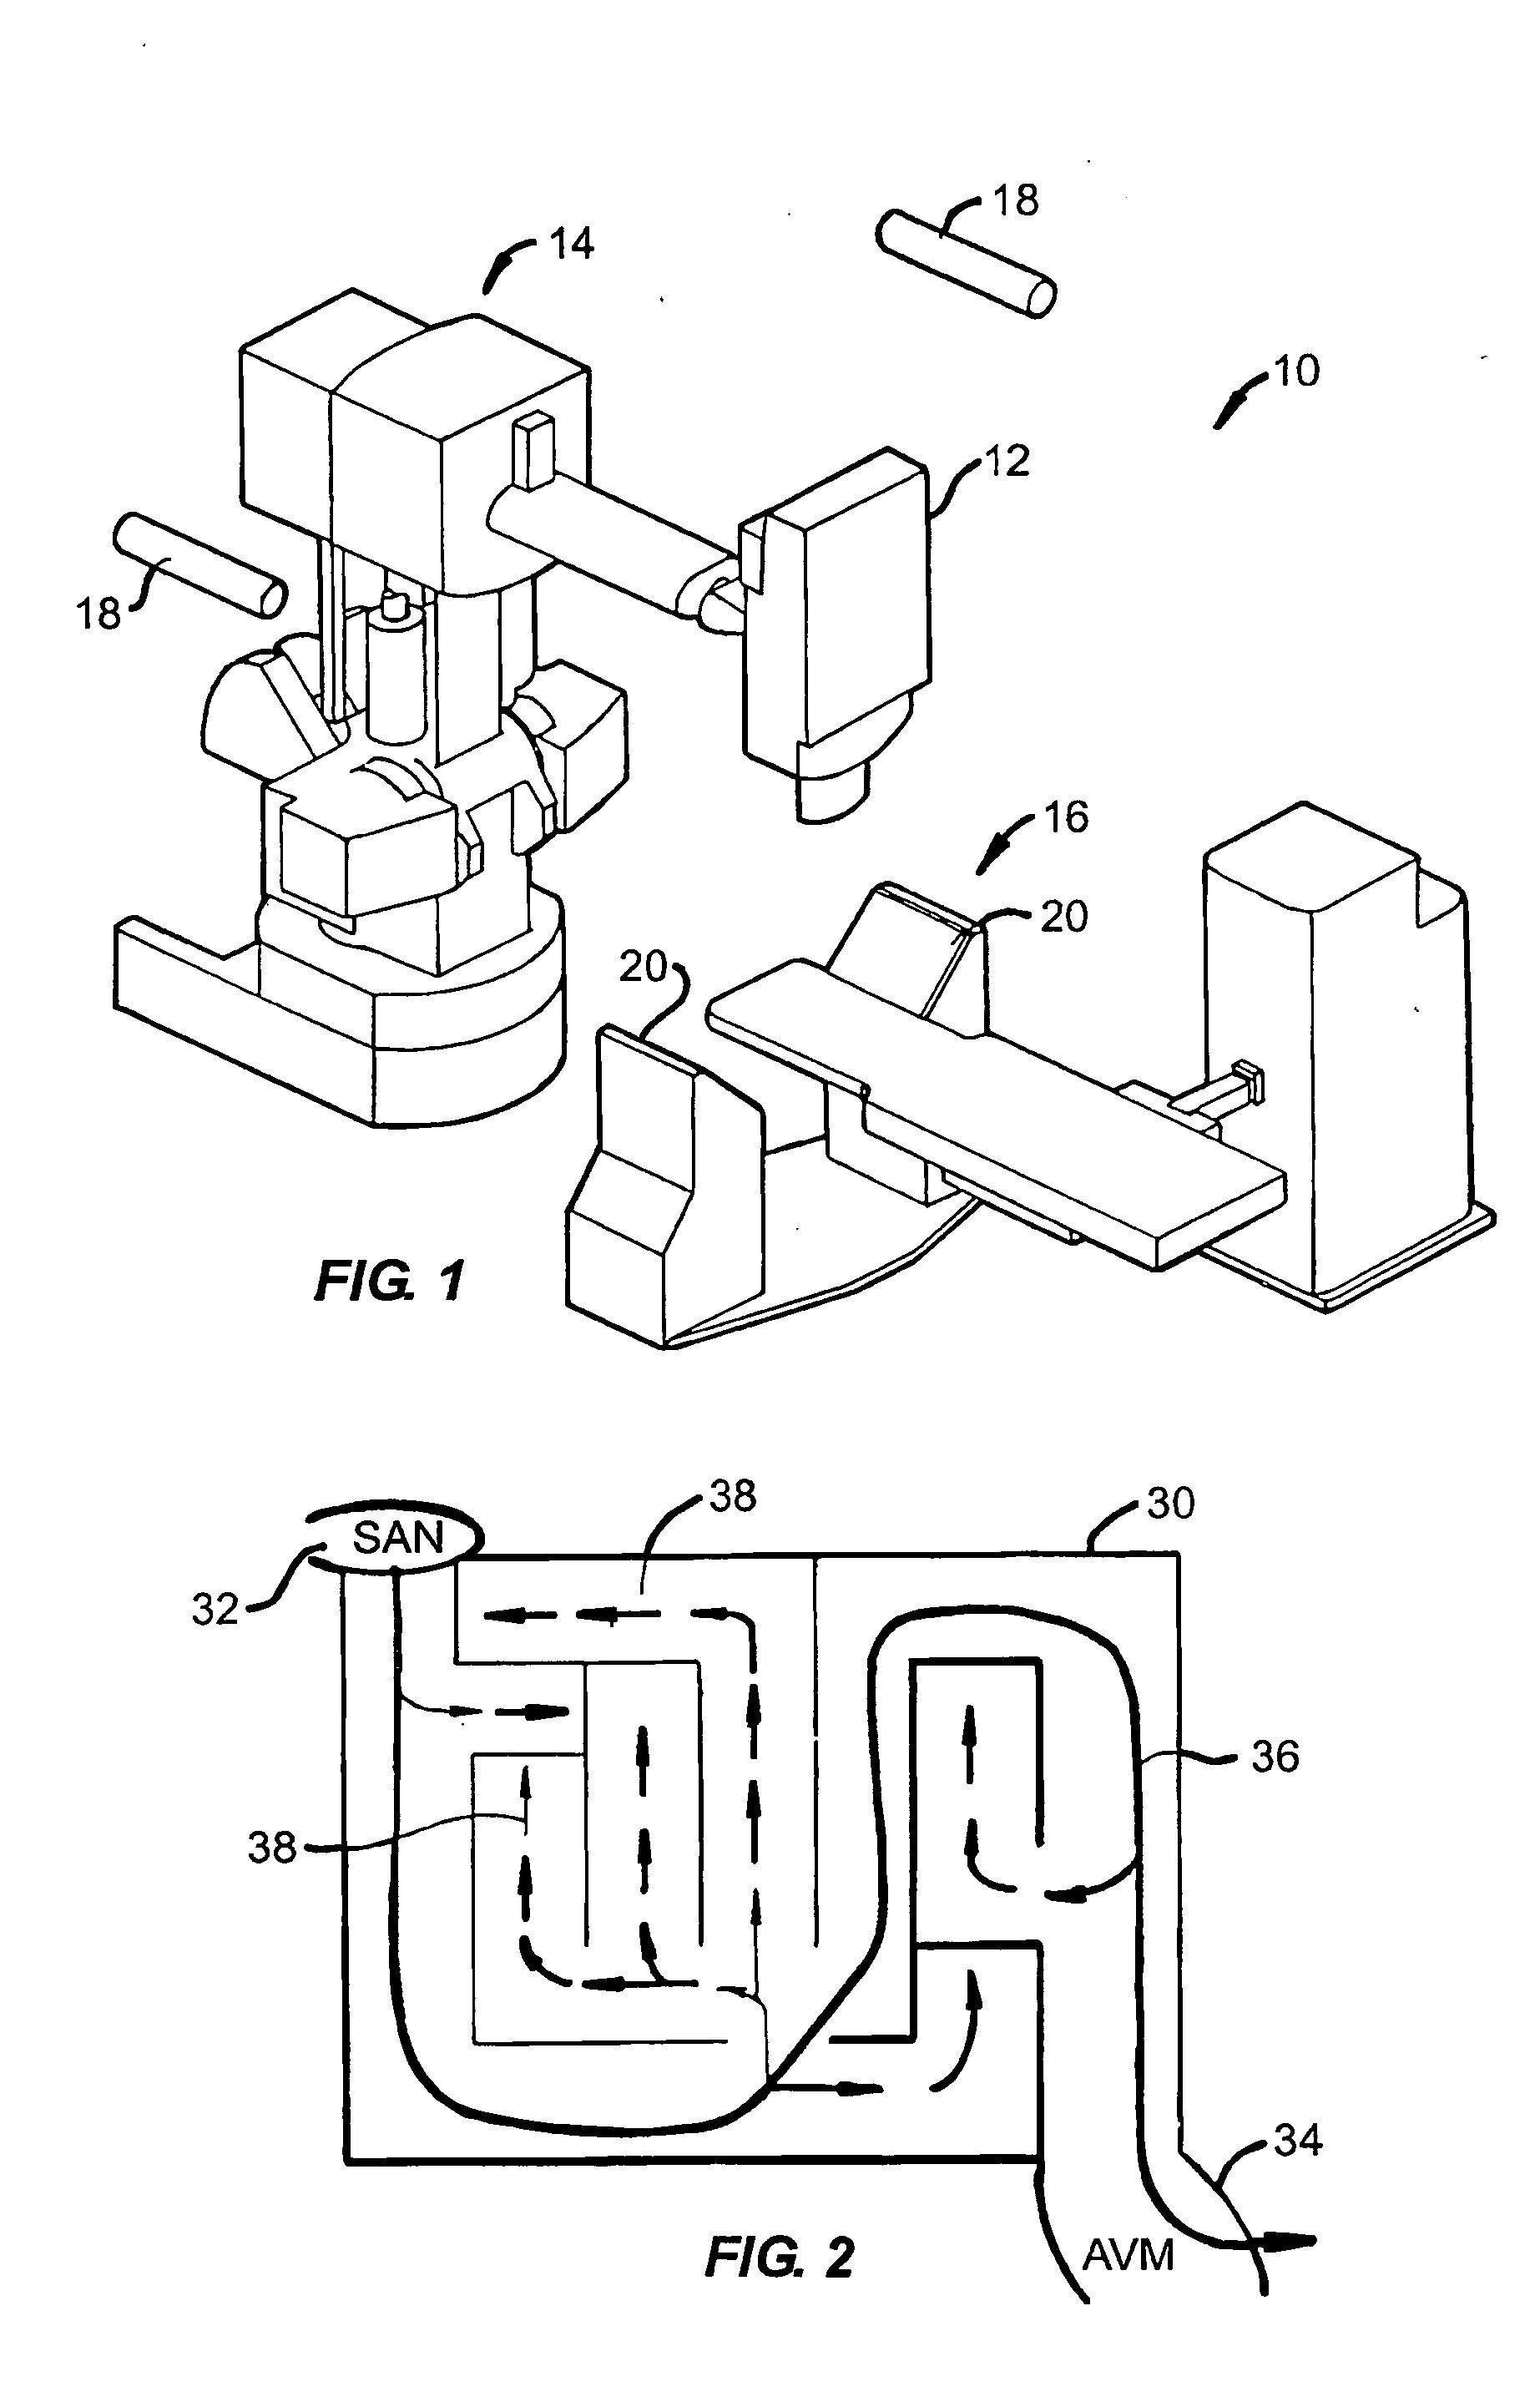 Method for non-invasive lung treatment